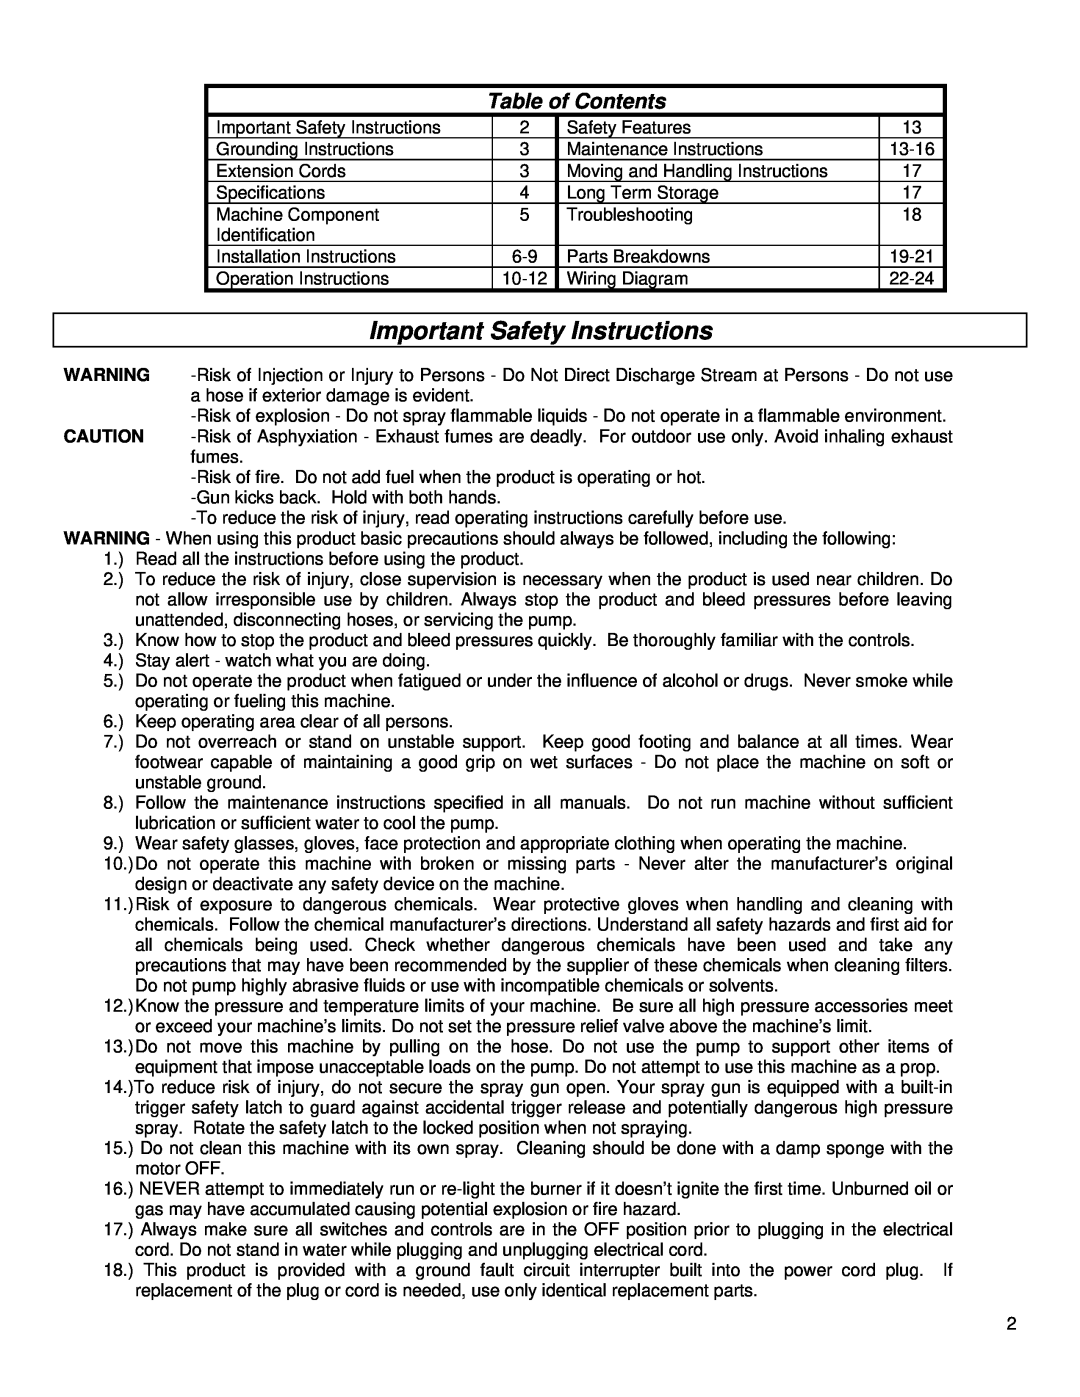 North Star M157305G specifications Important Safety Instructions, Table of Contents 